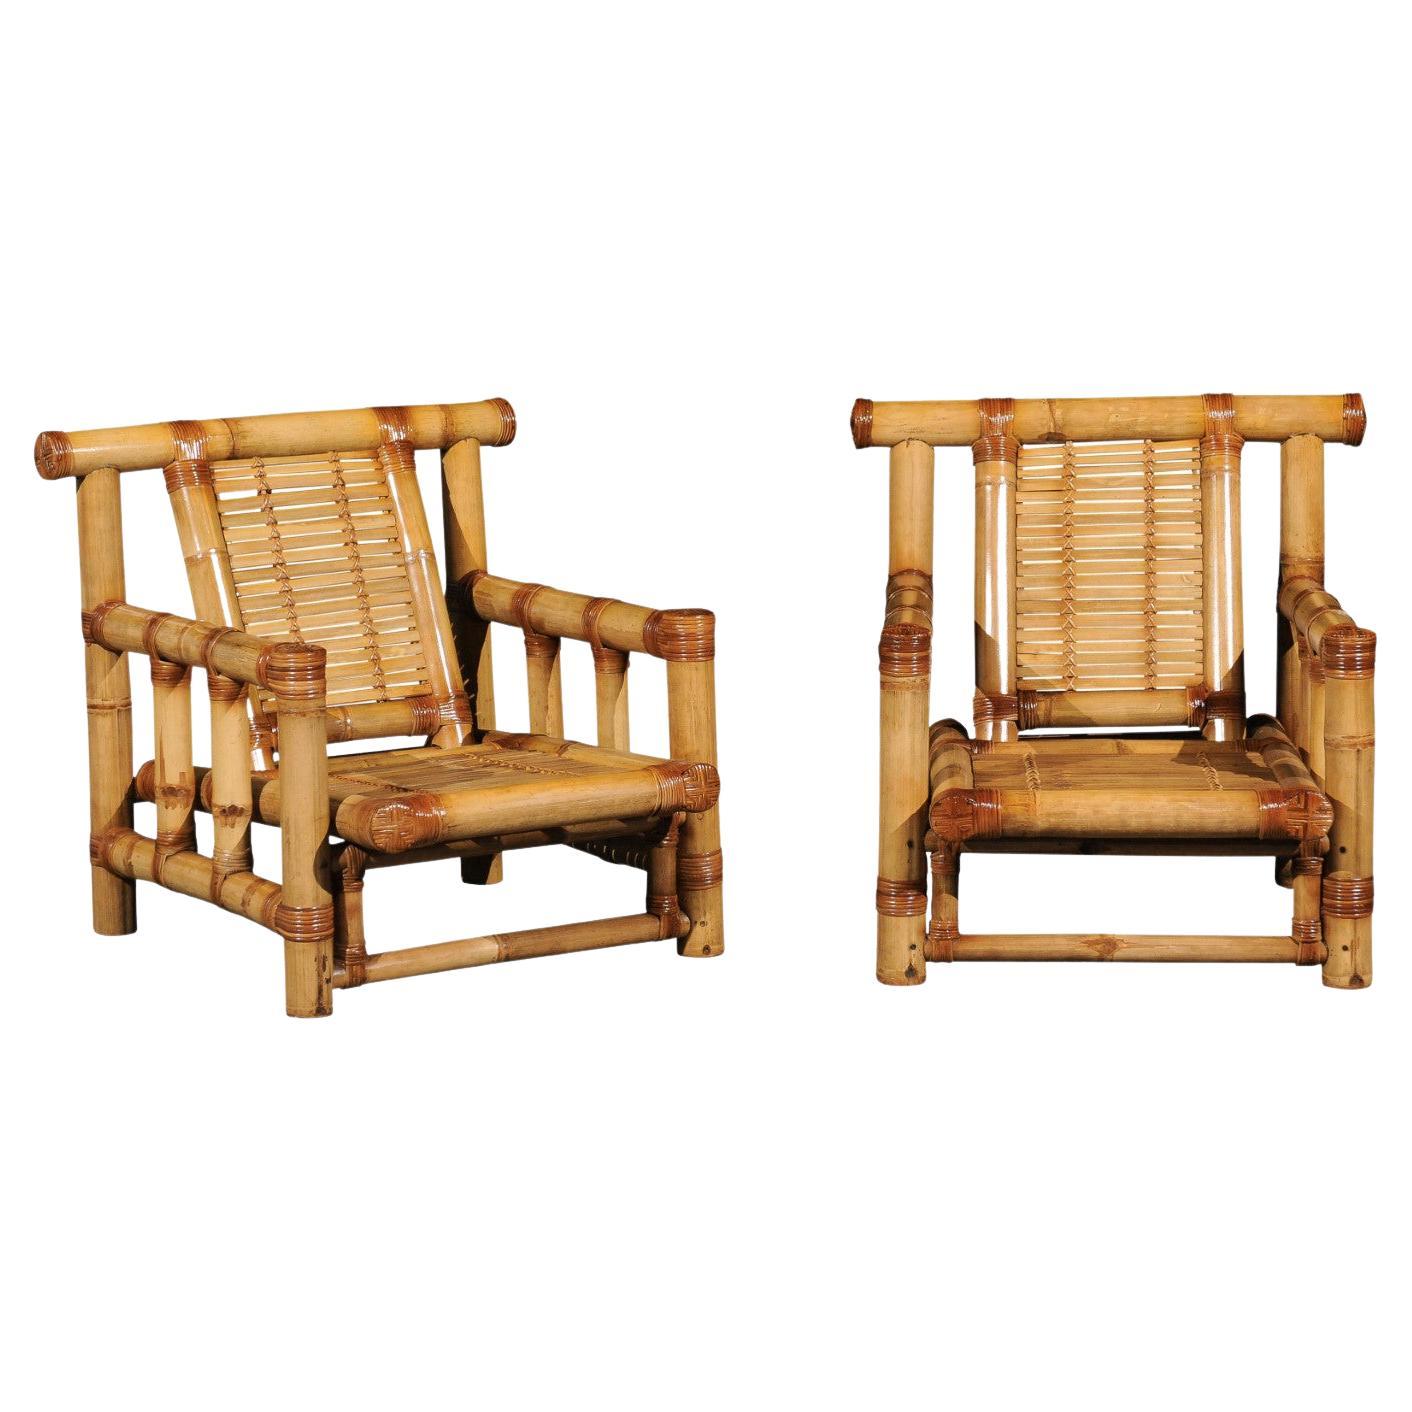 Majestic Pair of Bamboo Pagoda Loungers with Ottomans by Budji Layug, circa 1980